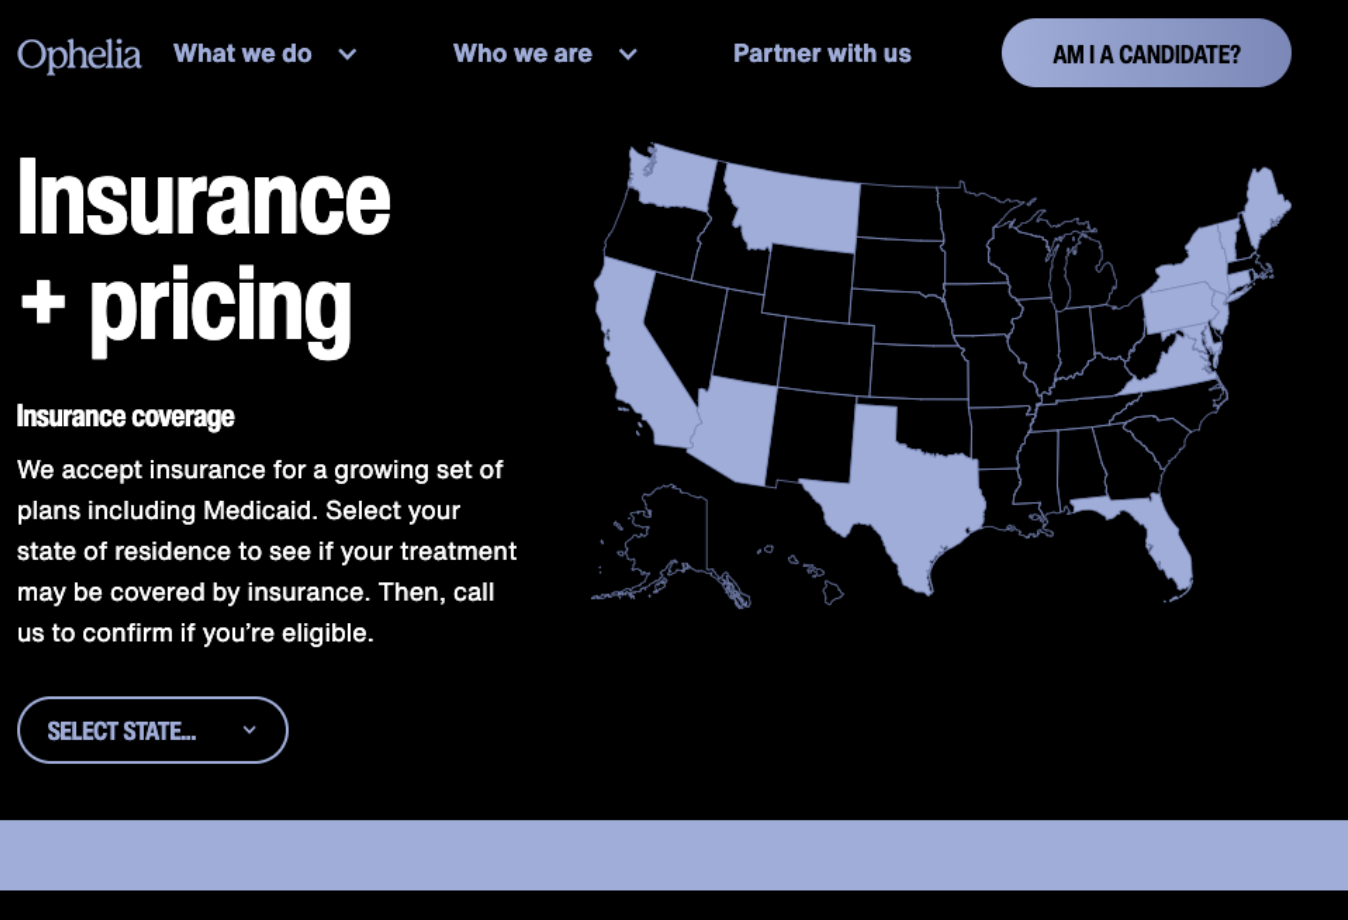 Ophelia page on US states they cover and insurance and pricing